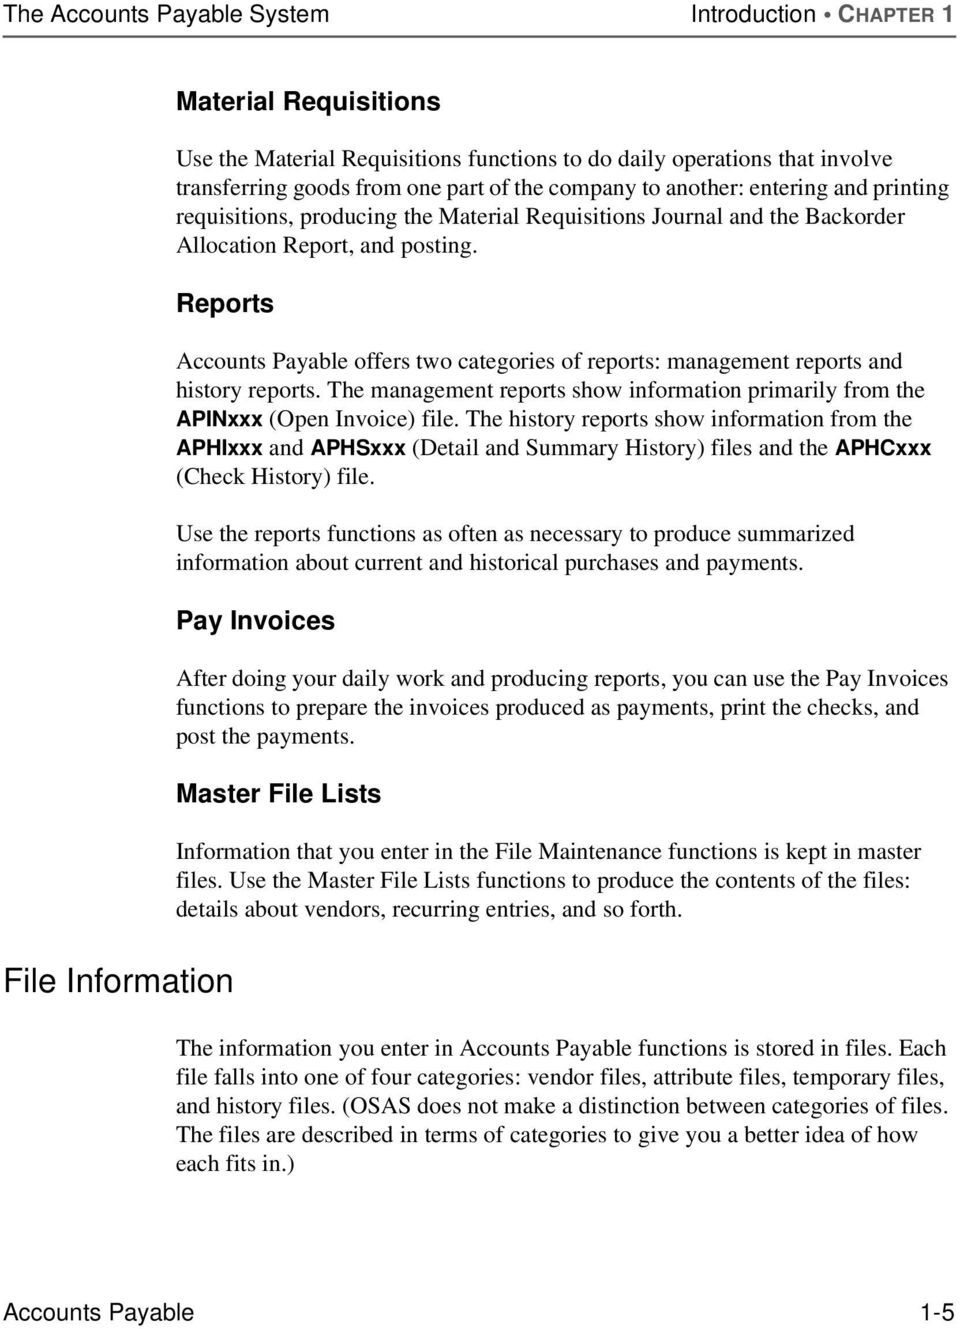 Reports File Information Accounts Payable offers two categories of reports: management reports and history reports.